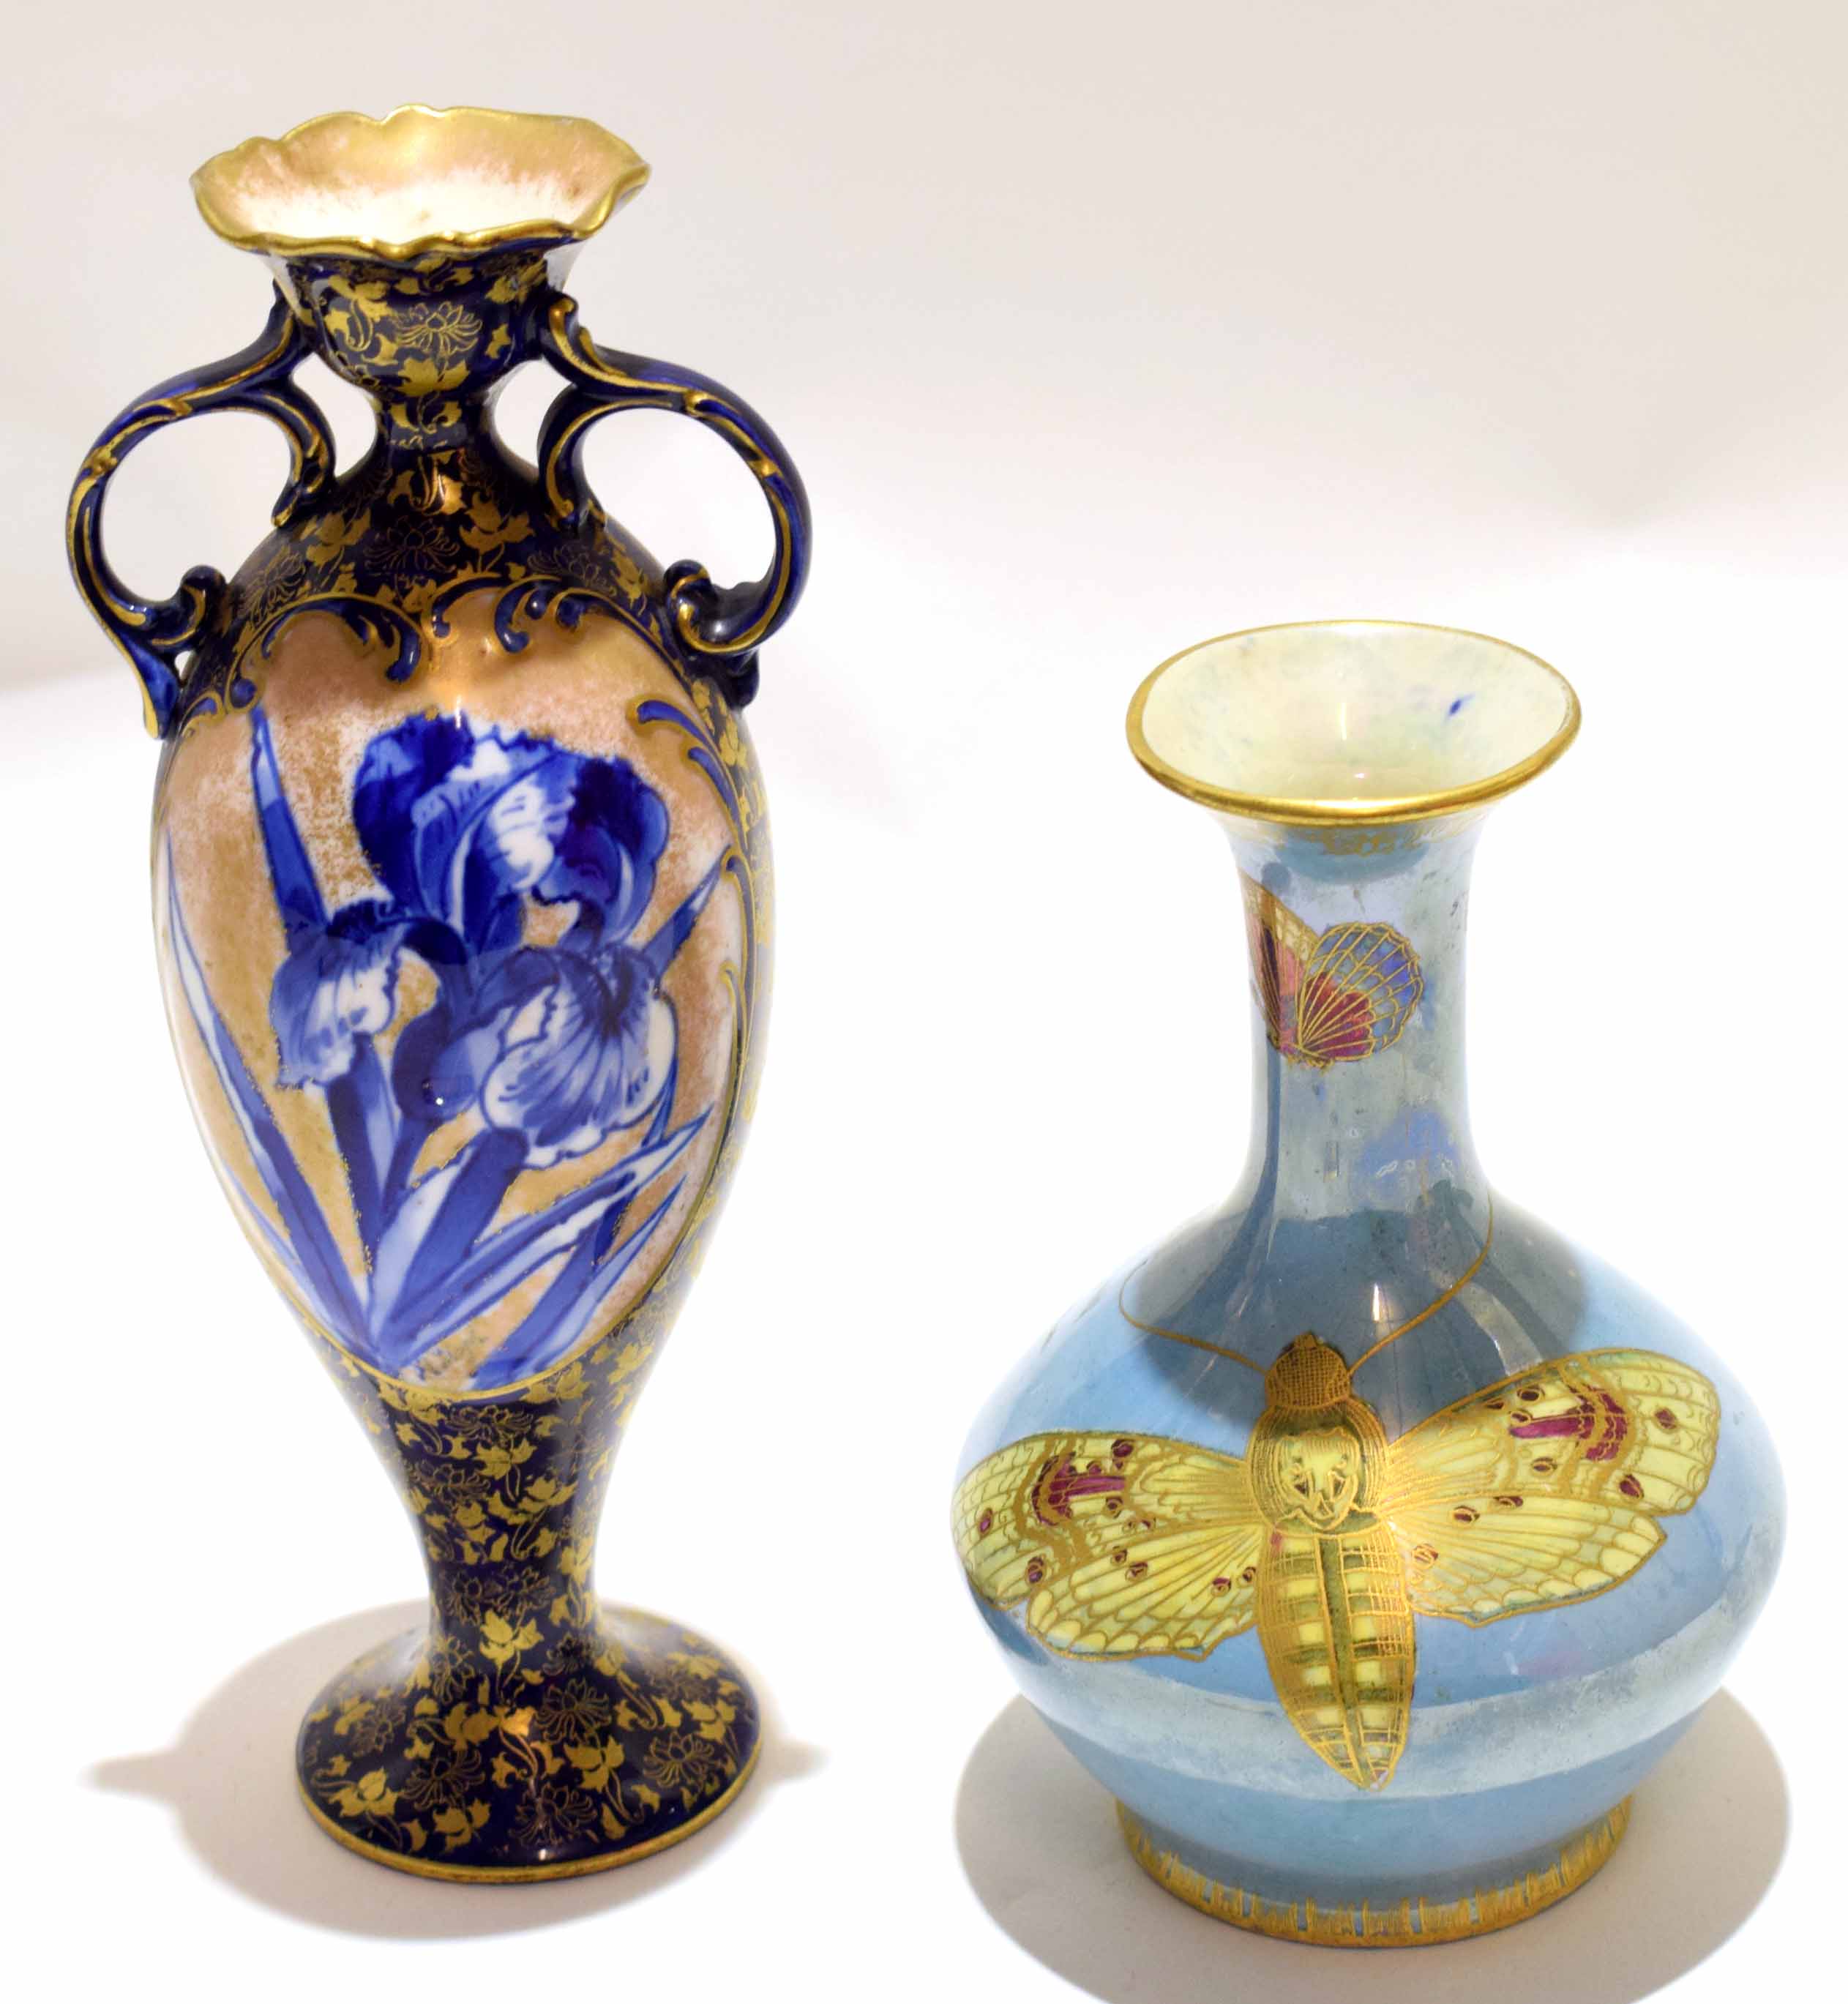 Early 20th century Carlton ware lustre vase decorated with butterflies, together with a late 19th